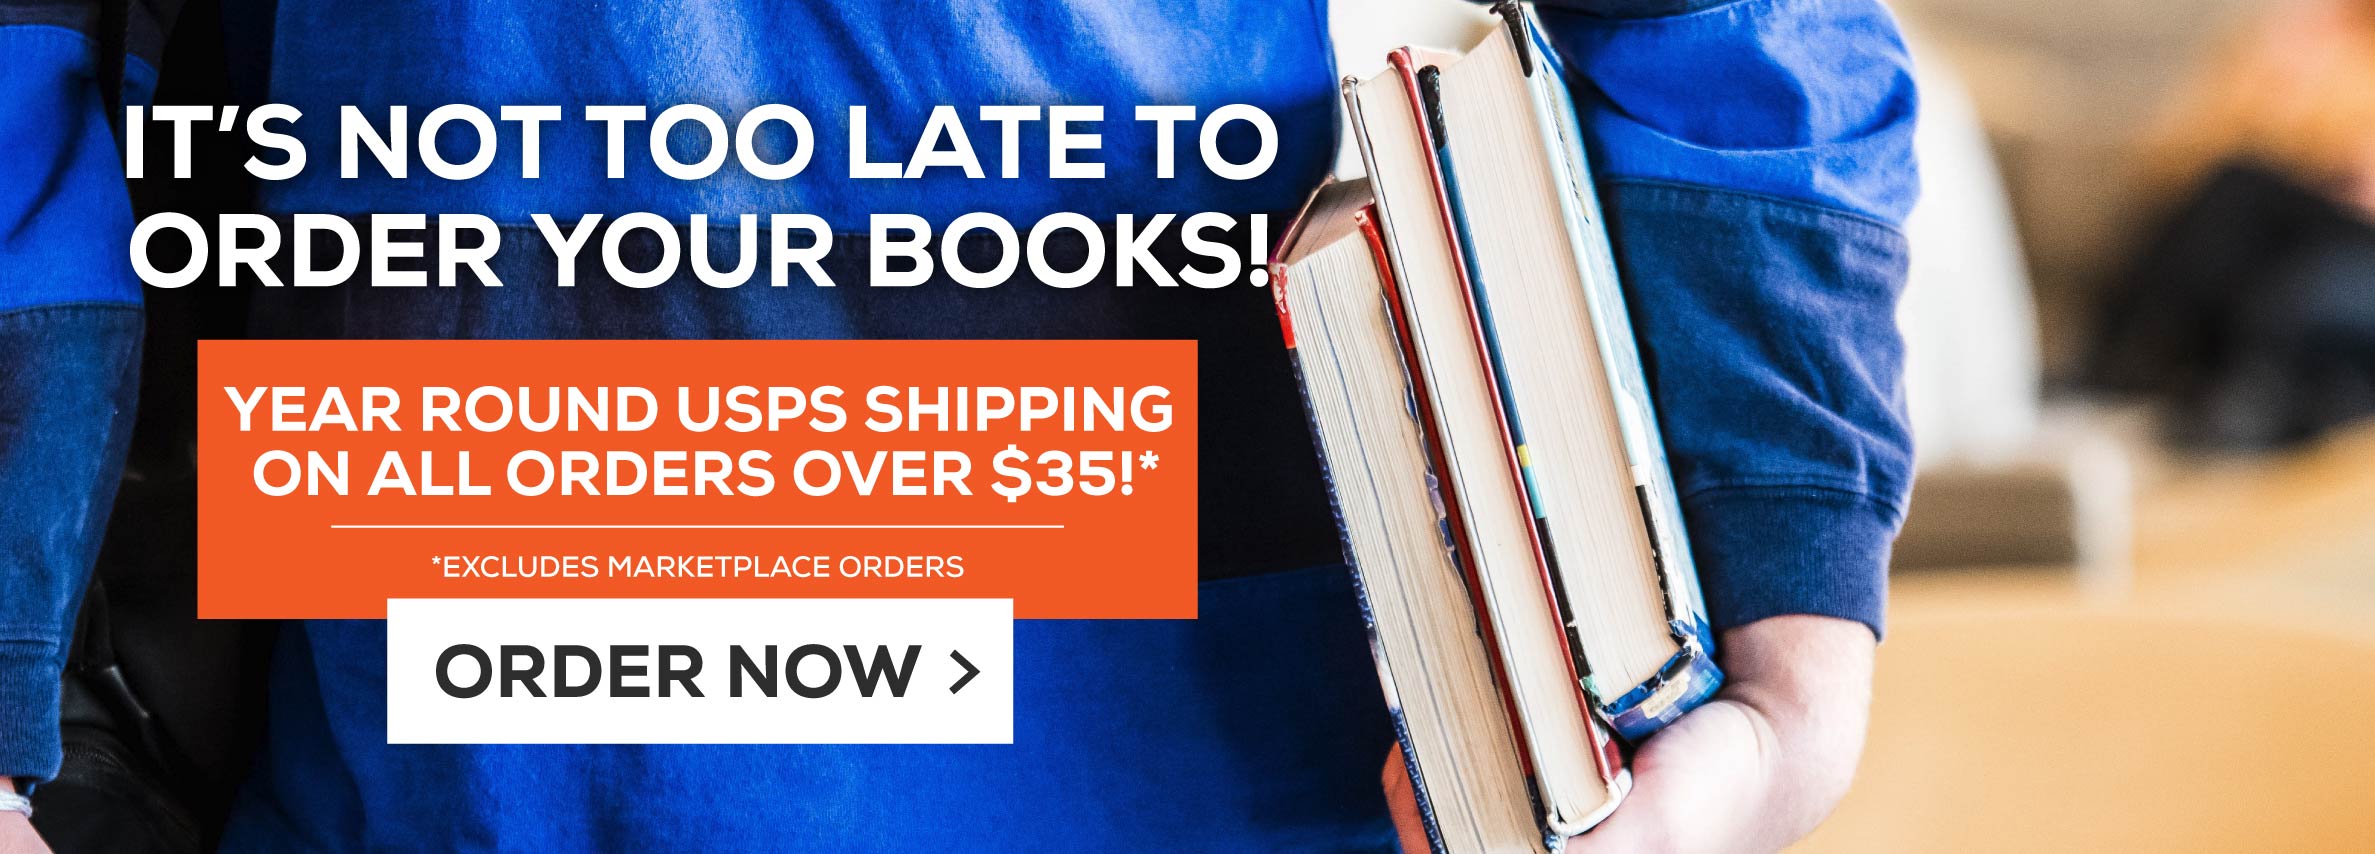 It's Not Too Late to Order Your Books! - Year Round USPS Shipping on all orders over $35!- Excludes Marketplace Orders - Order Now